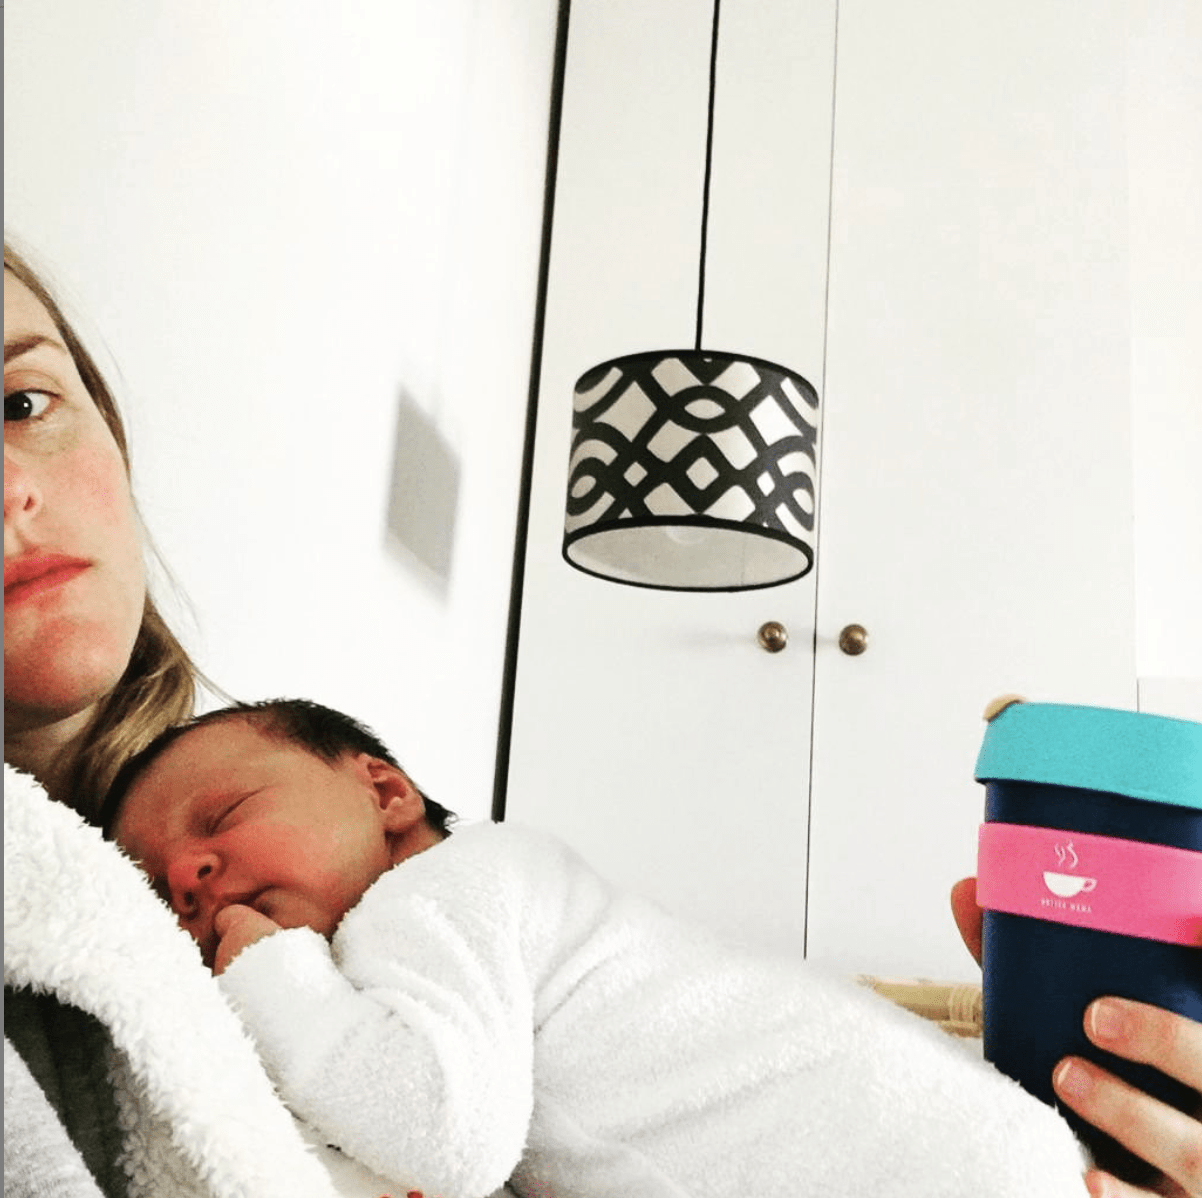 Mum in bed with newborn baby on her chest, looking tired